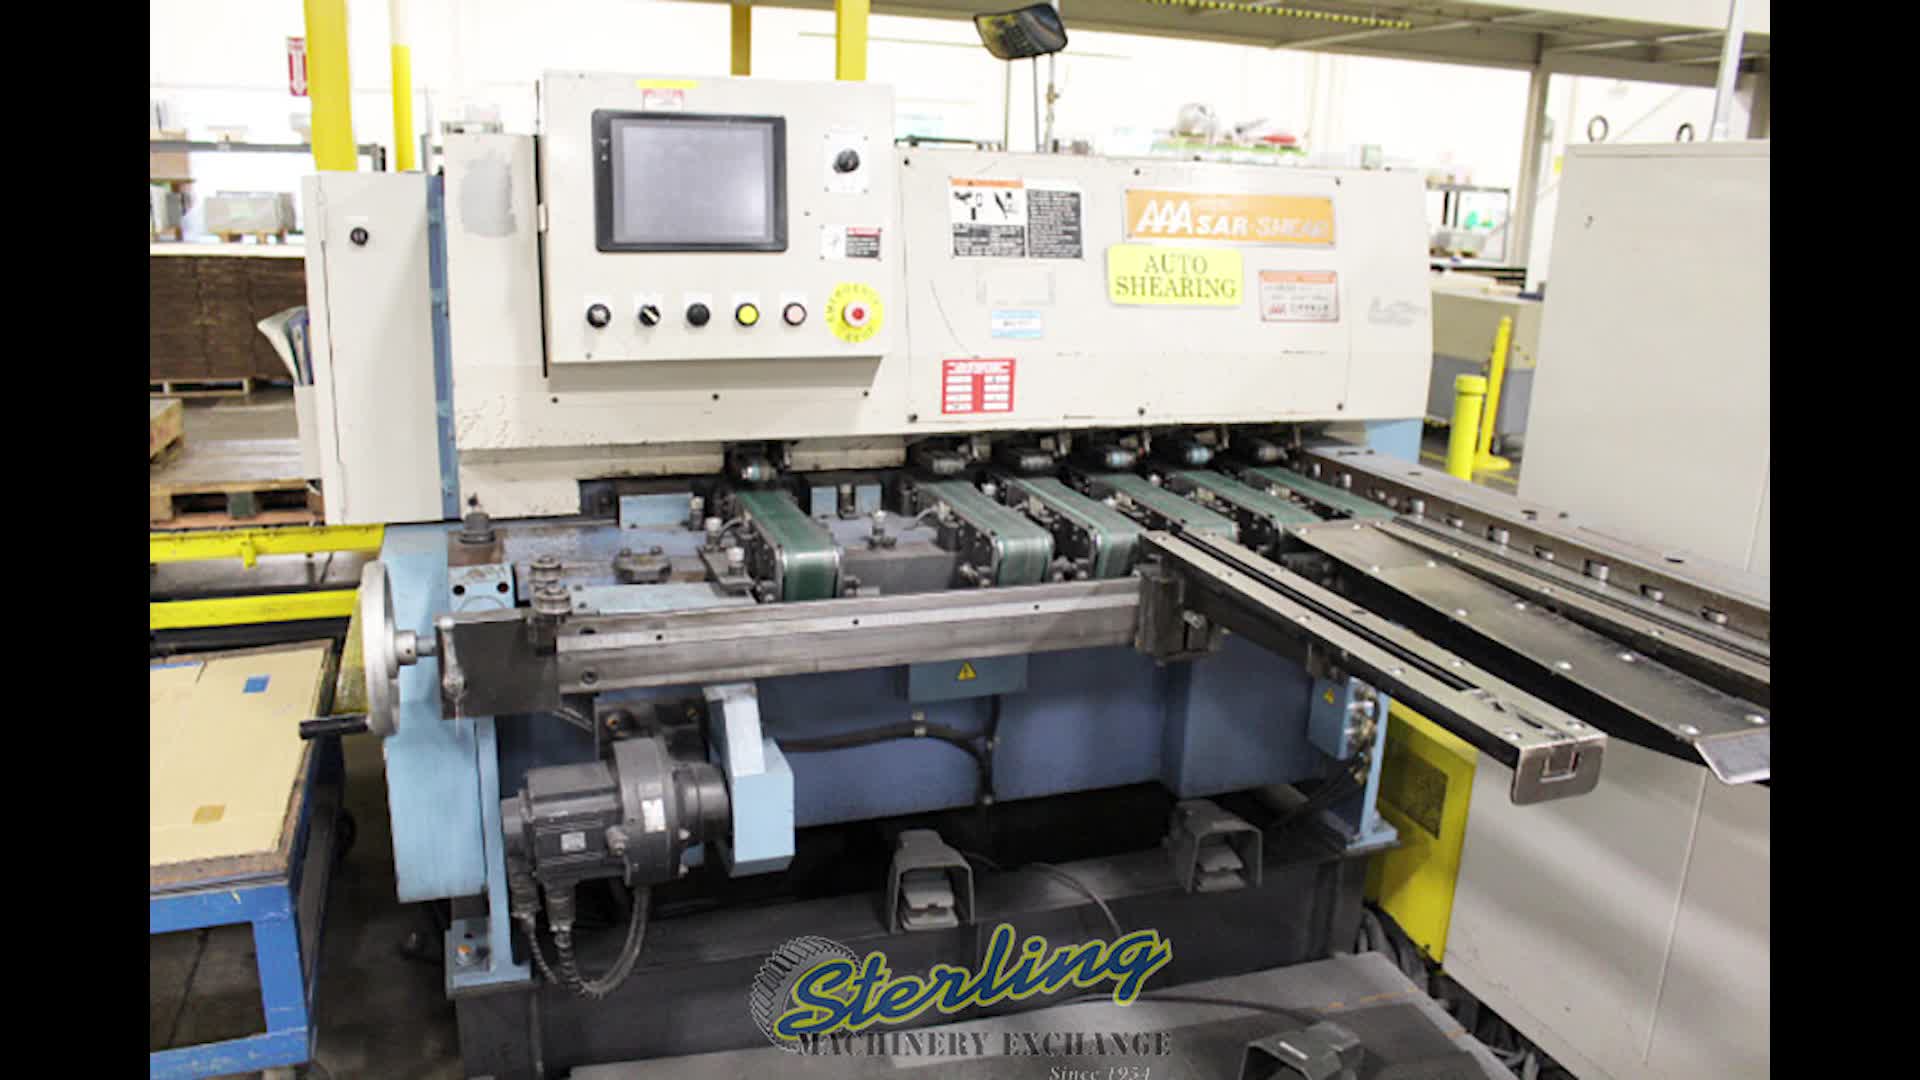 Aizawa-1/8" X 49" USED AIZAWA AUTOMATIC SHEAR CUTTING LINE (GREAT FOR SMALL PIECES), MDL. SAR-312C, LIFT TABLE LOADER (FRONT), POWER THRU FEED, PILING LIFTER, OMRON SYSMAC C200HG PLC TOUCHSCREEN CONTROL, #A4791-01